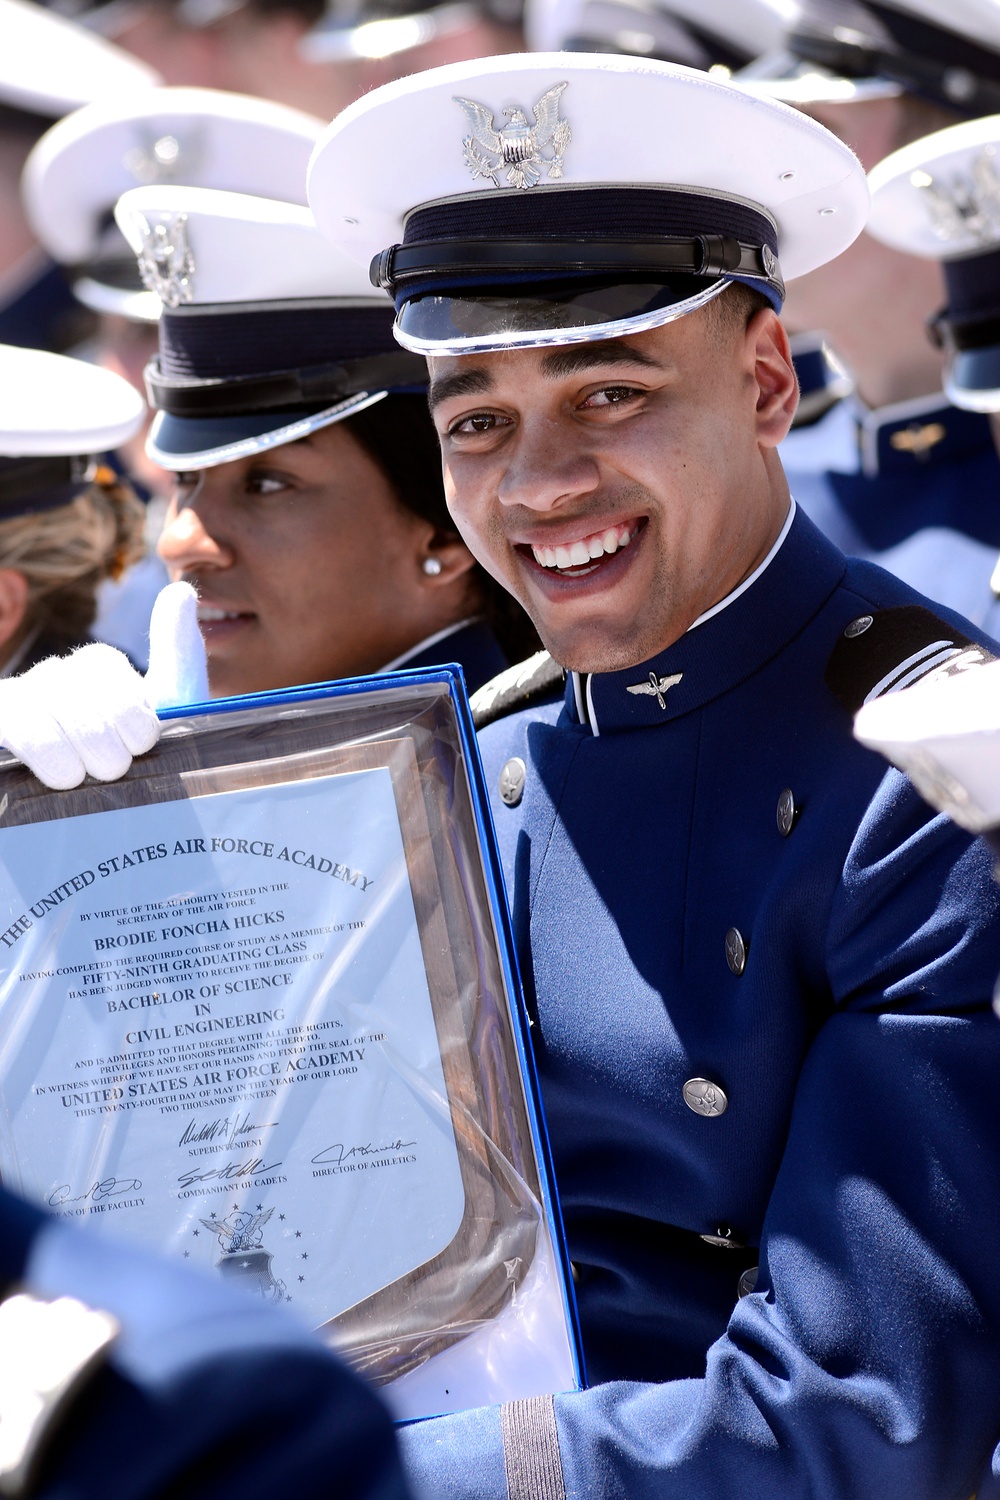 DVIDS Images 052417 U.S. Air Force Academy Class of 2017